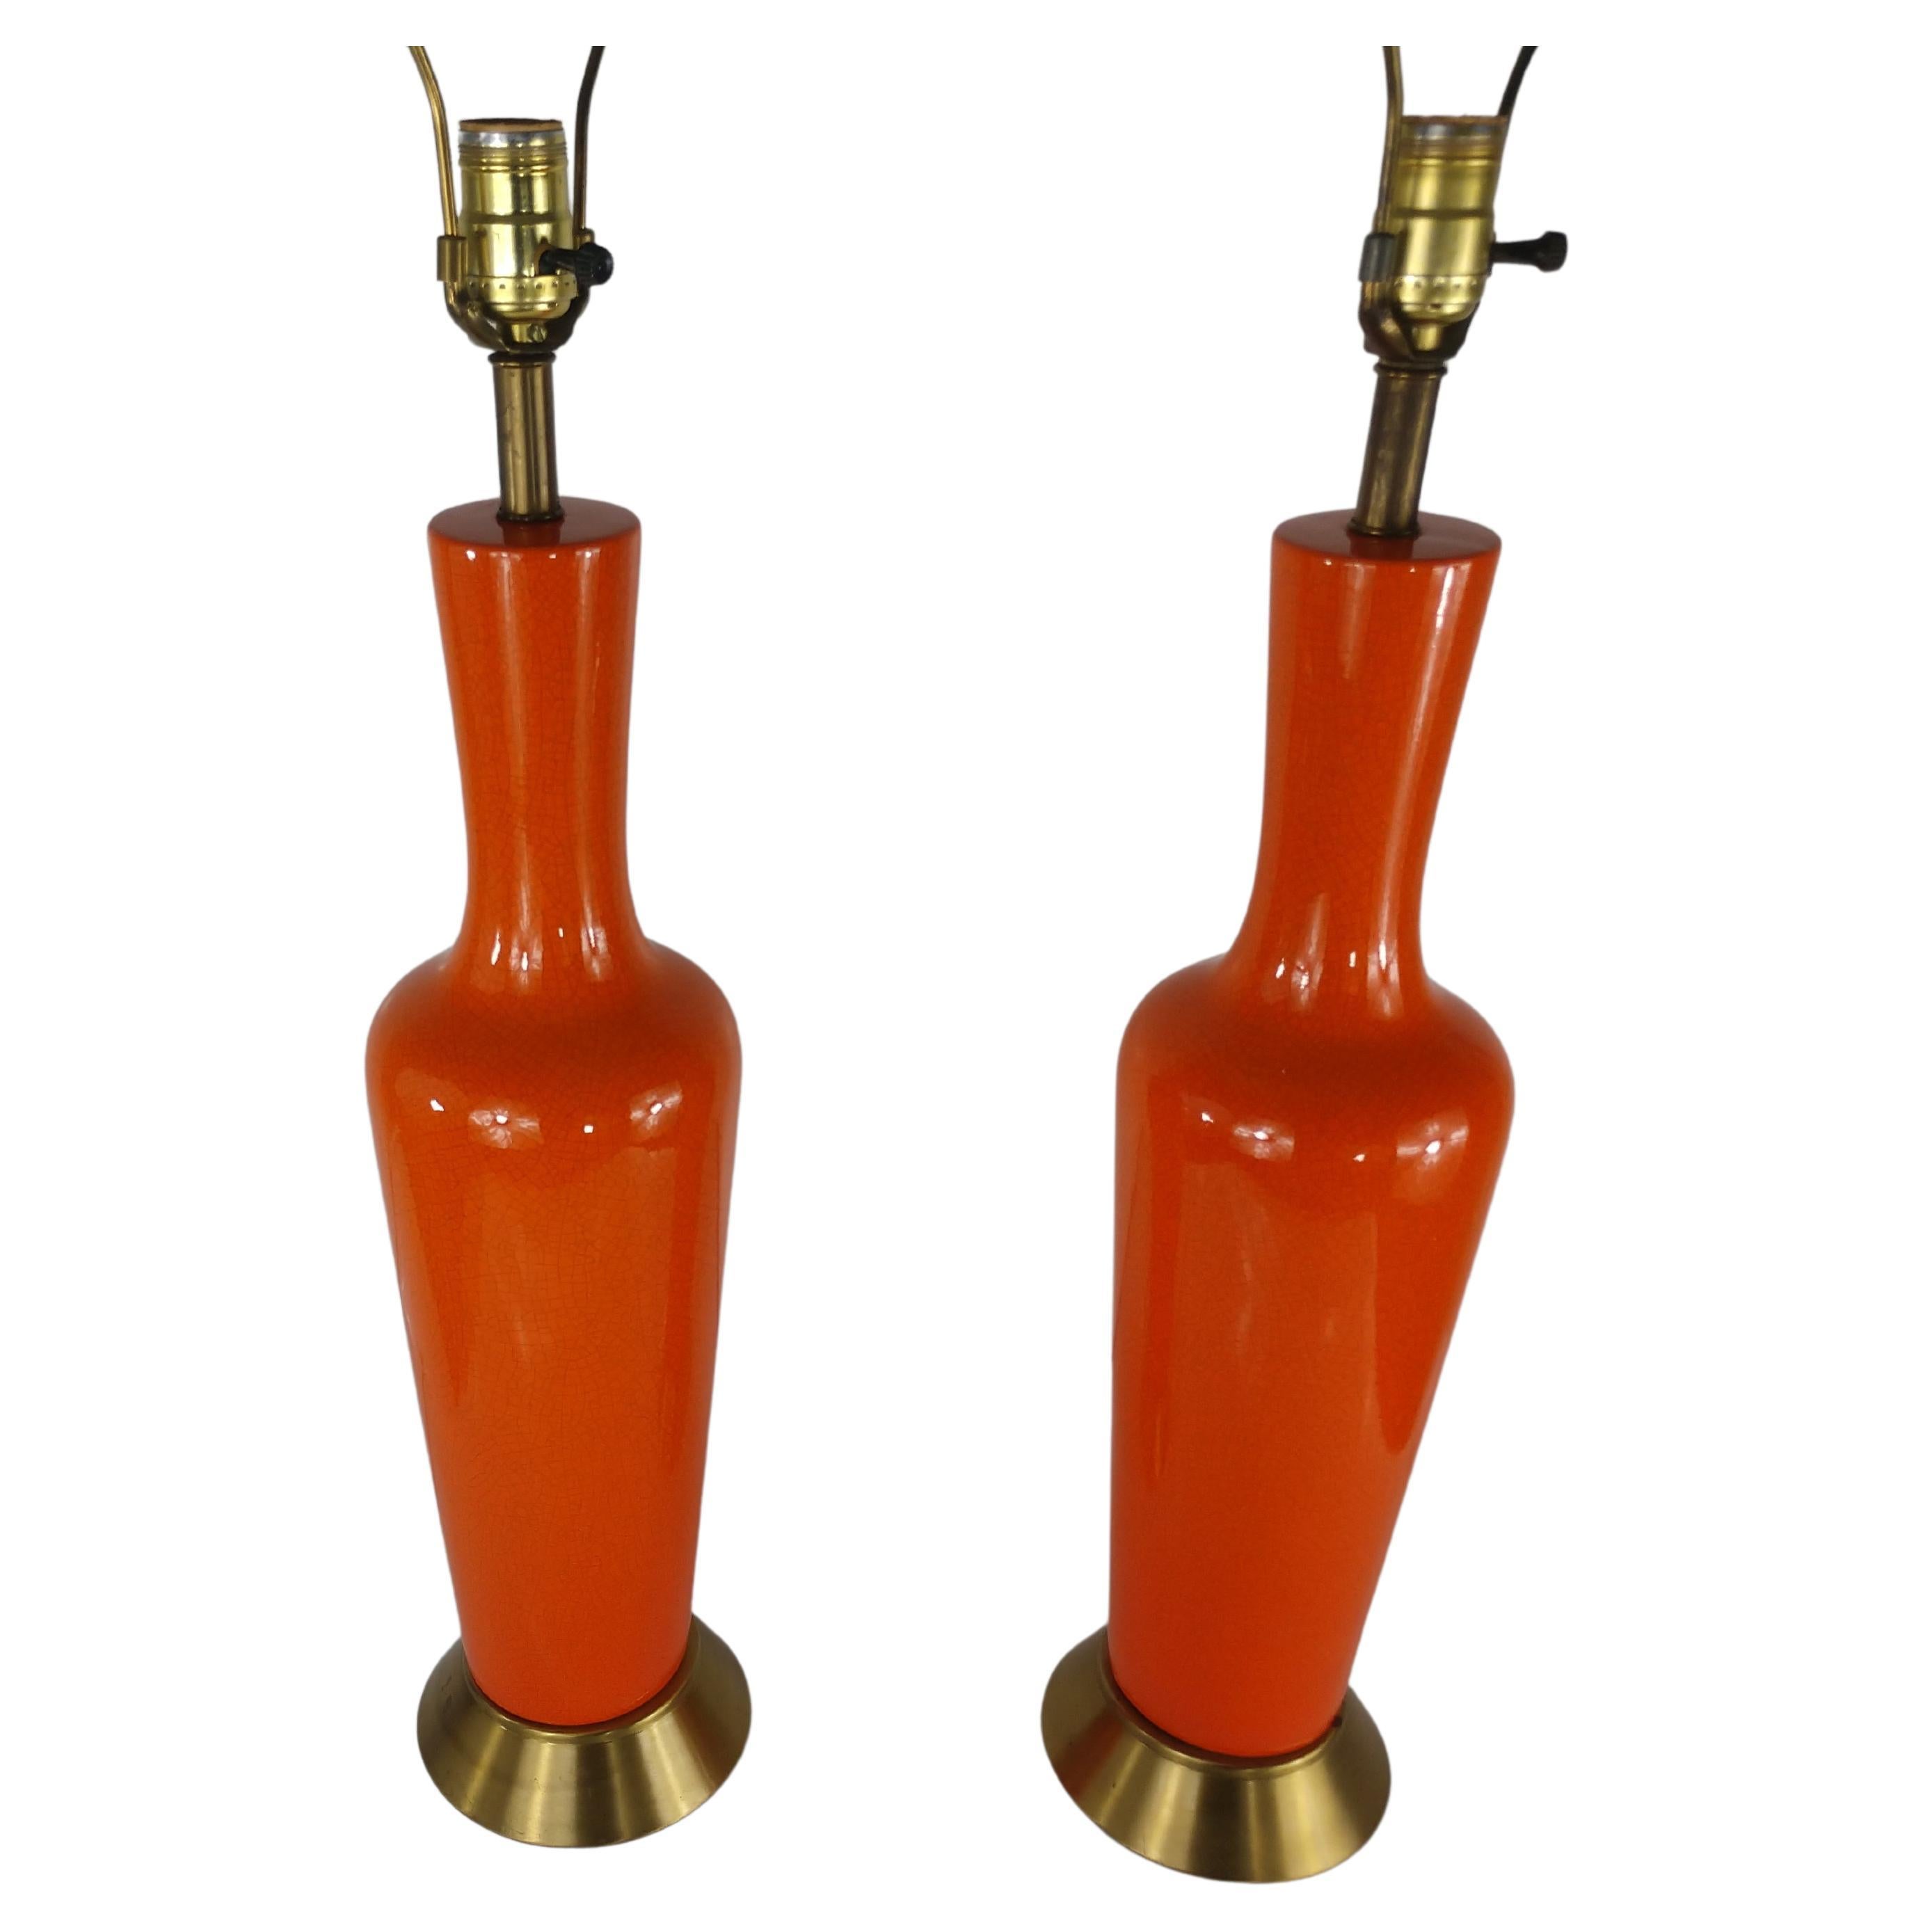 Glazed Pair of Mid-Century Modern Table Lamps with Orange Crackle Glaze, C1958 For Sale